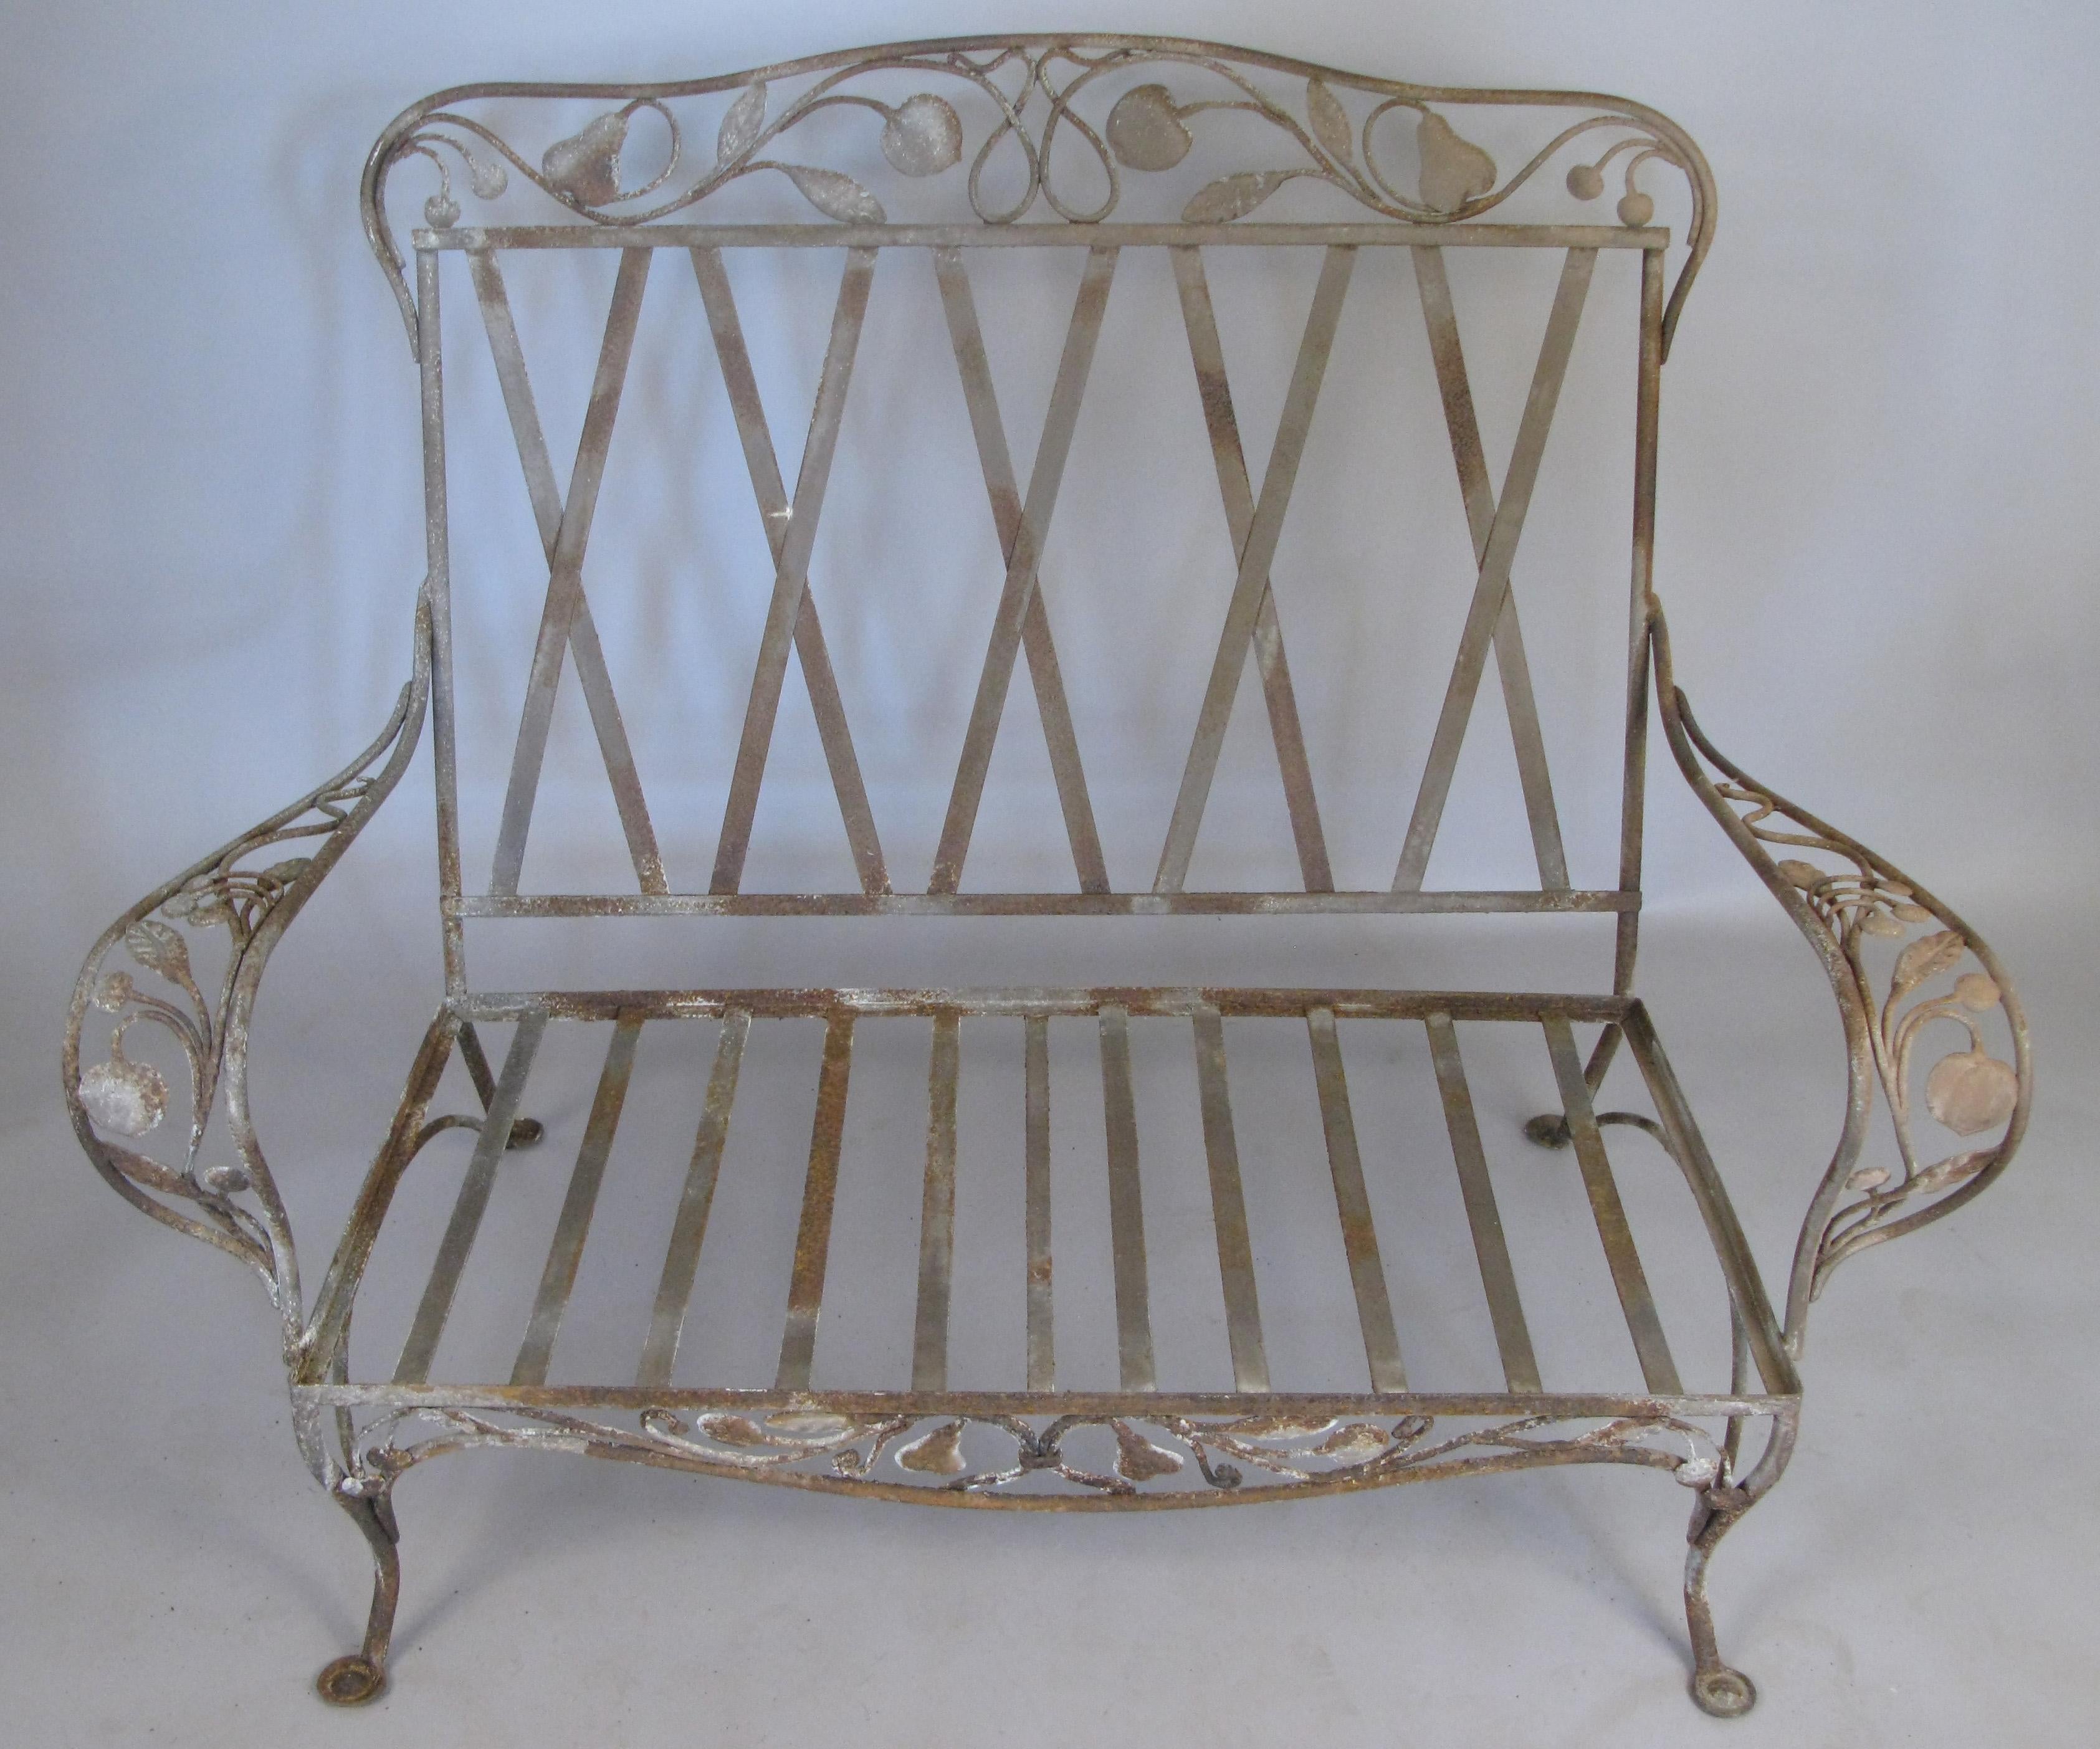 A large and rare Saltertini wrought iron settee, with a beautiful decorative motif on the arms, skirt, and seatback of large pears and apples. In original condition, can be stripped and restored if desired.